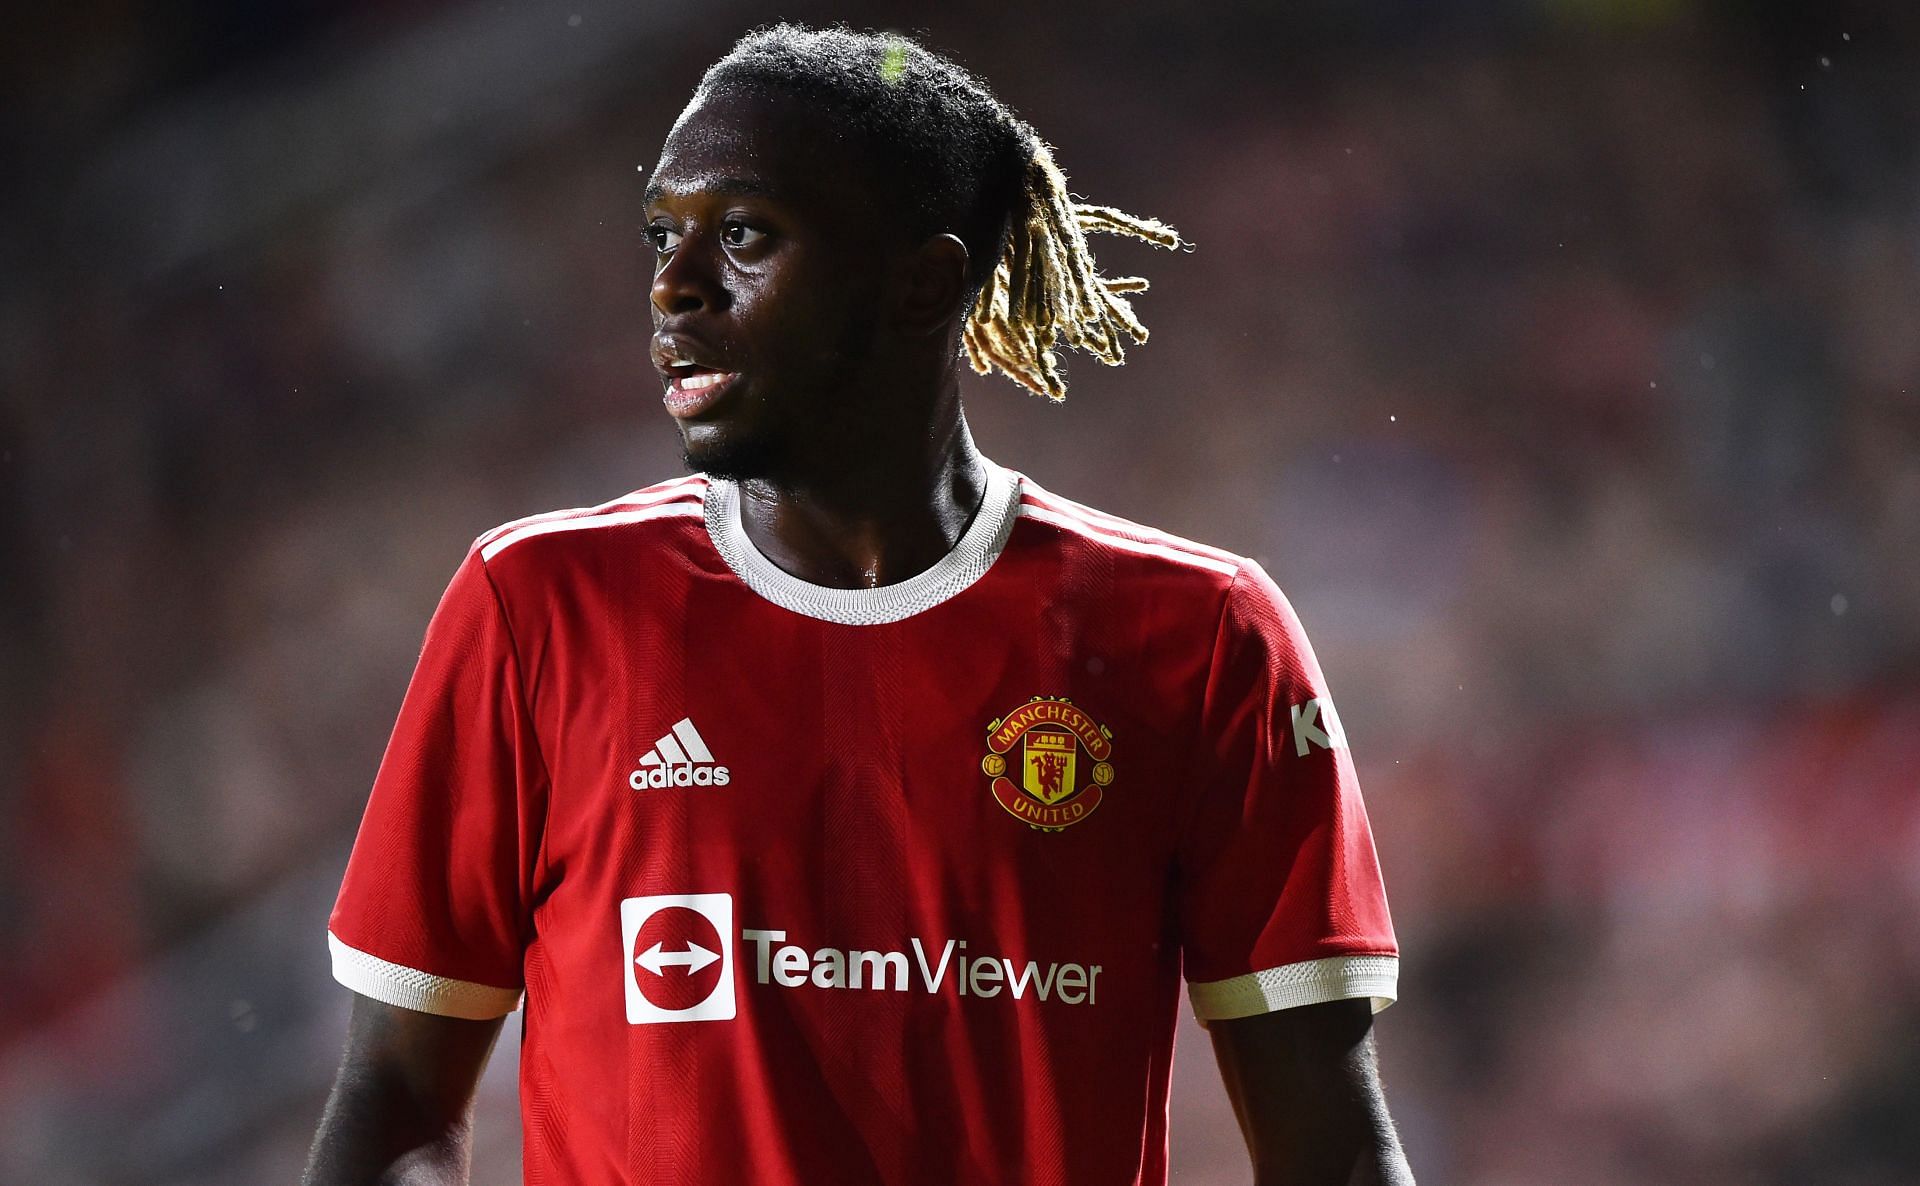 Wan-Bissaka may be heading out of Old Trafford